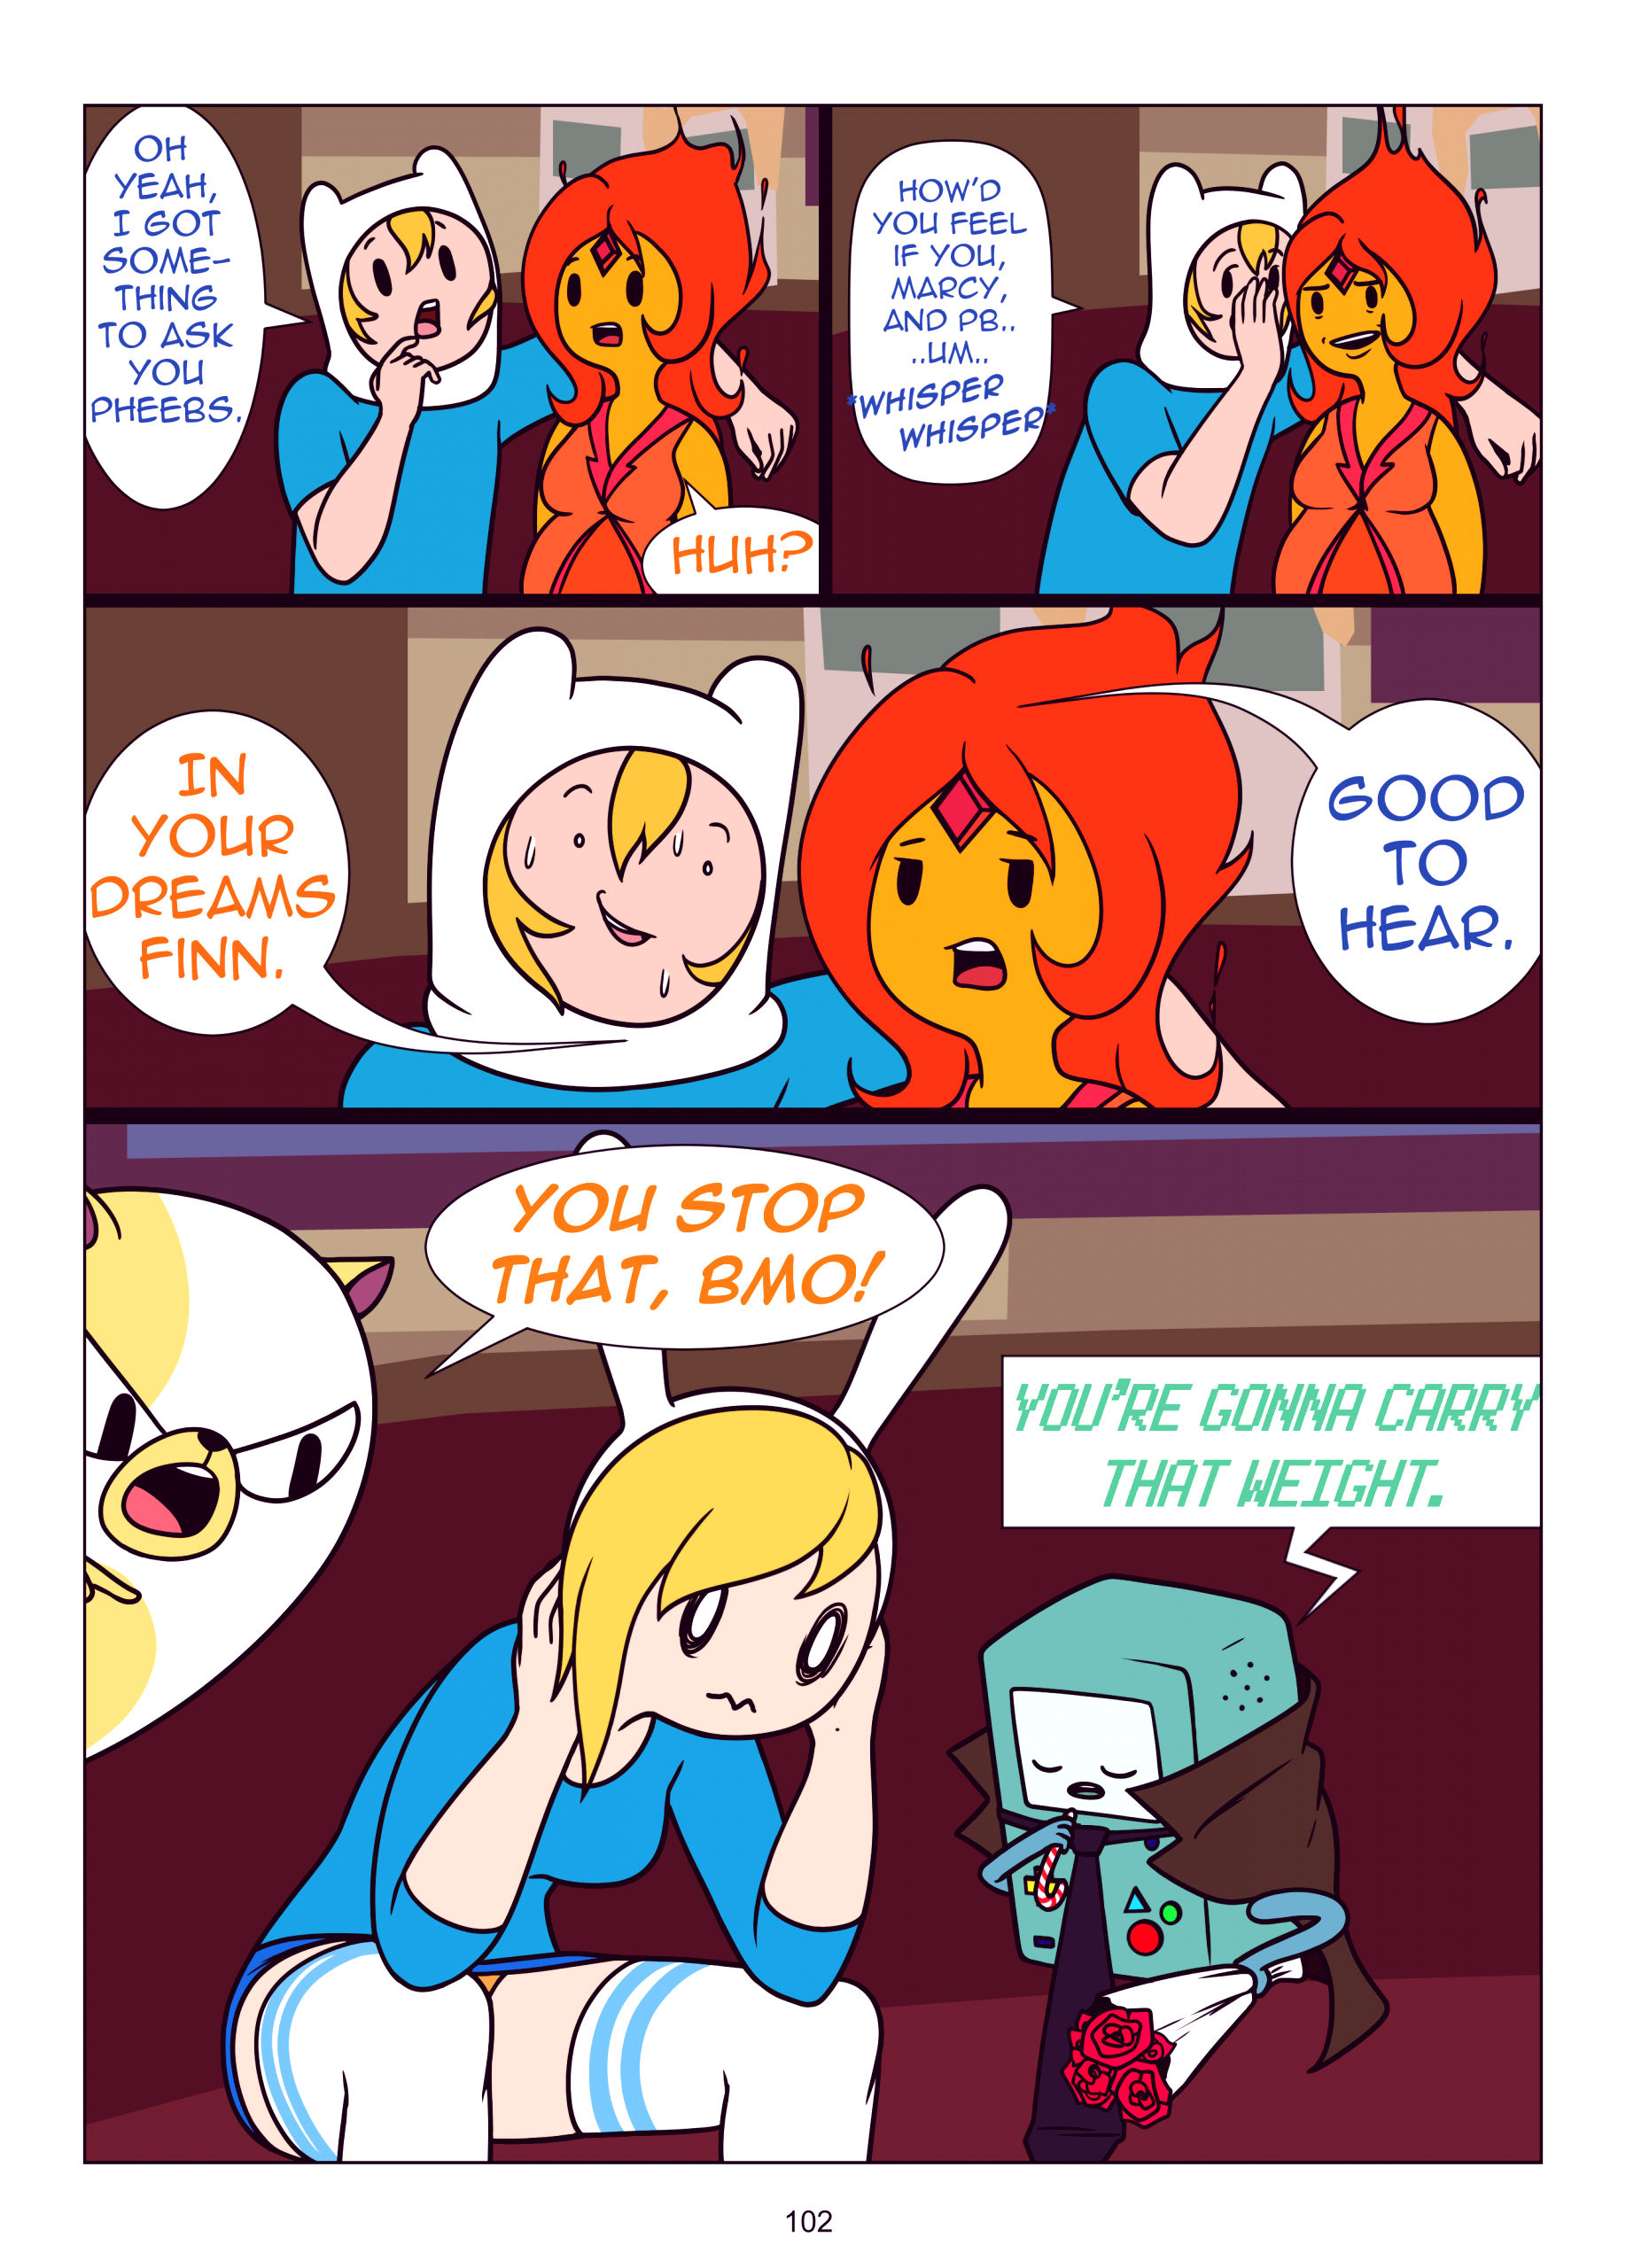 Misadventure time the collection porn comic picture 103